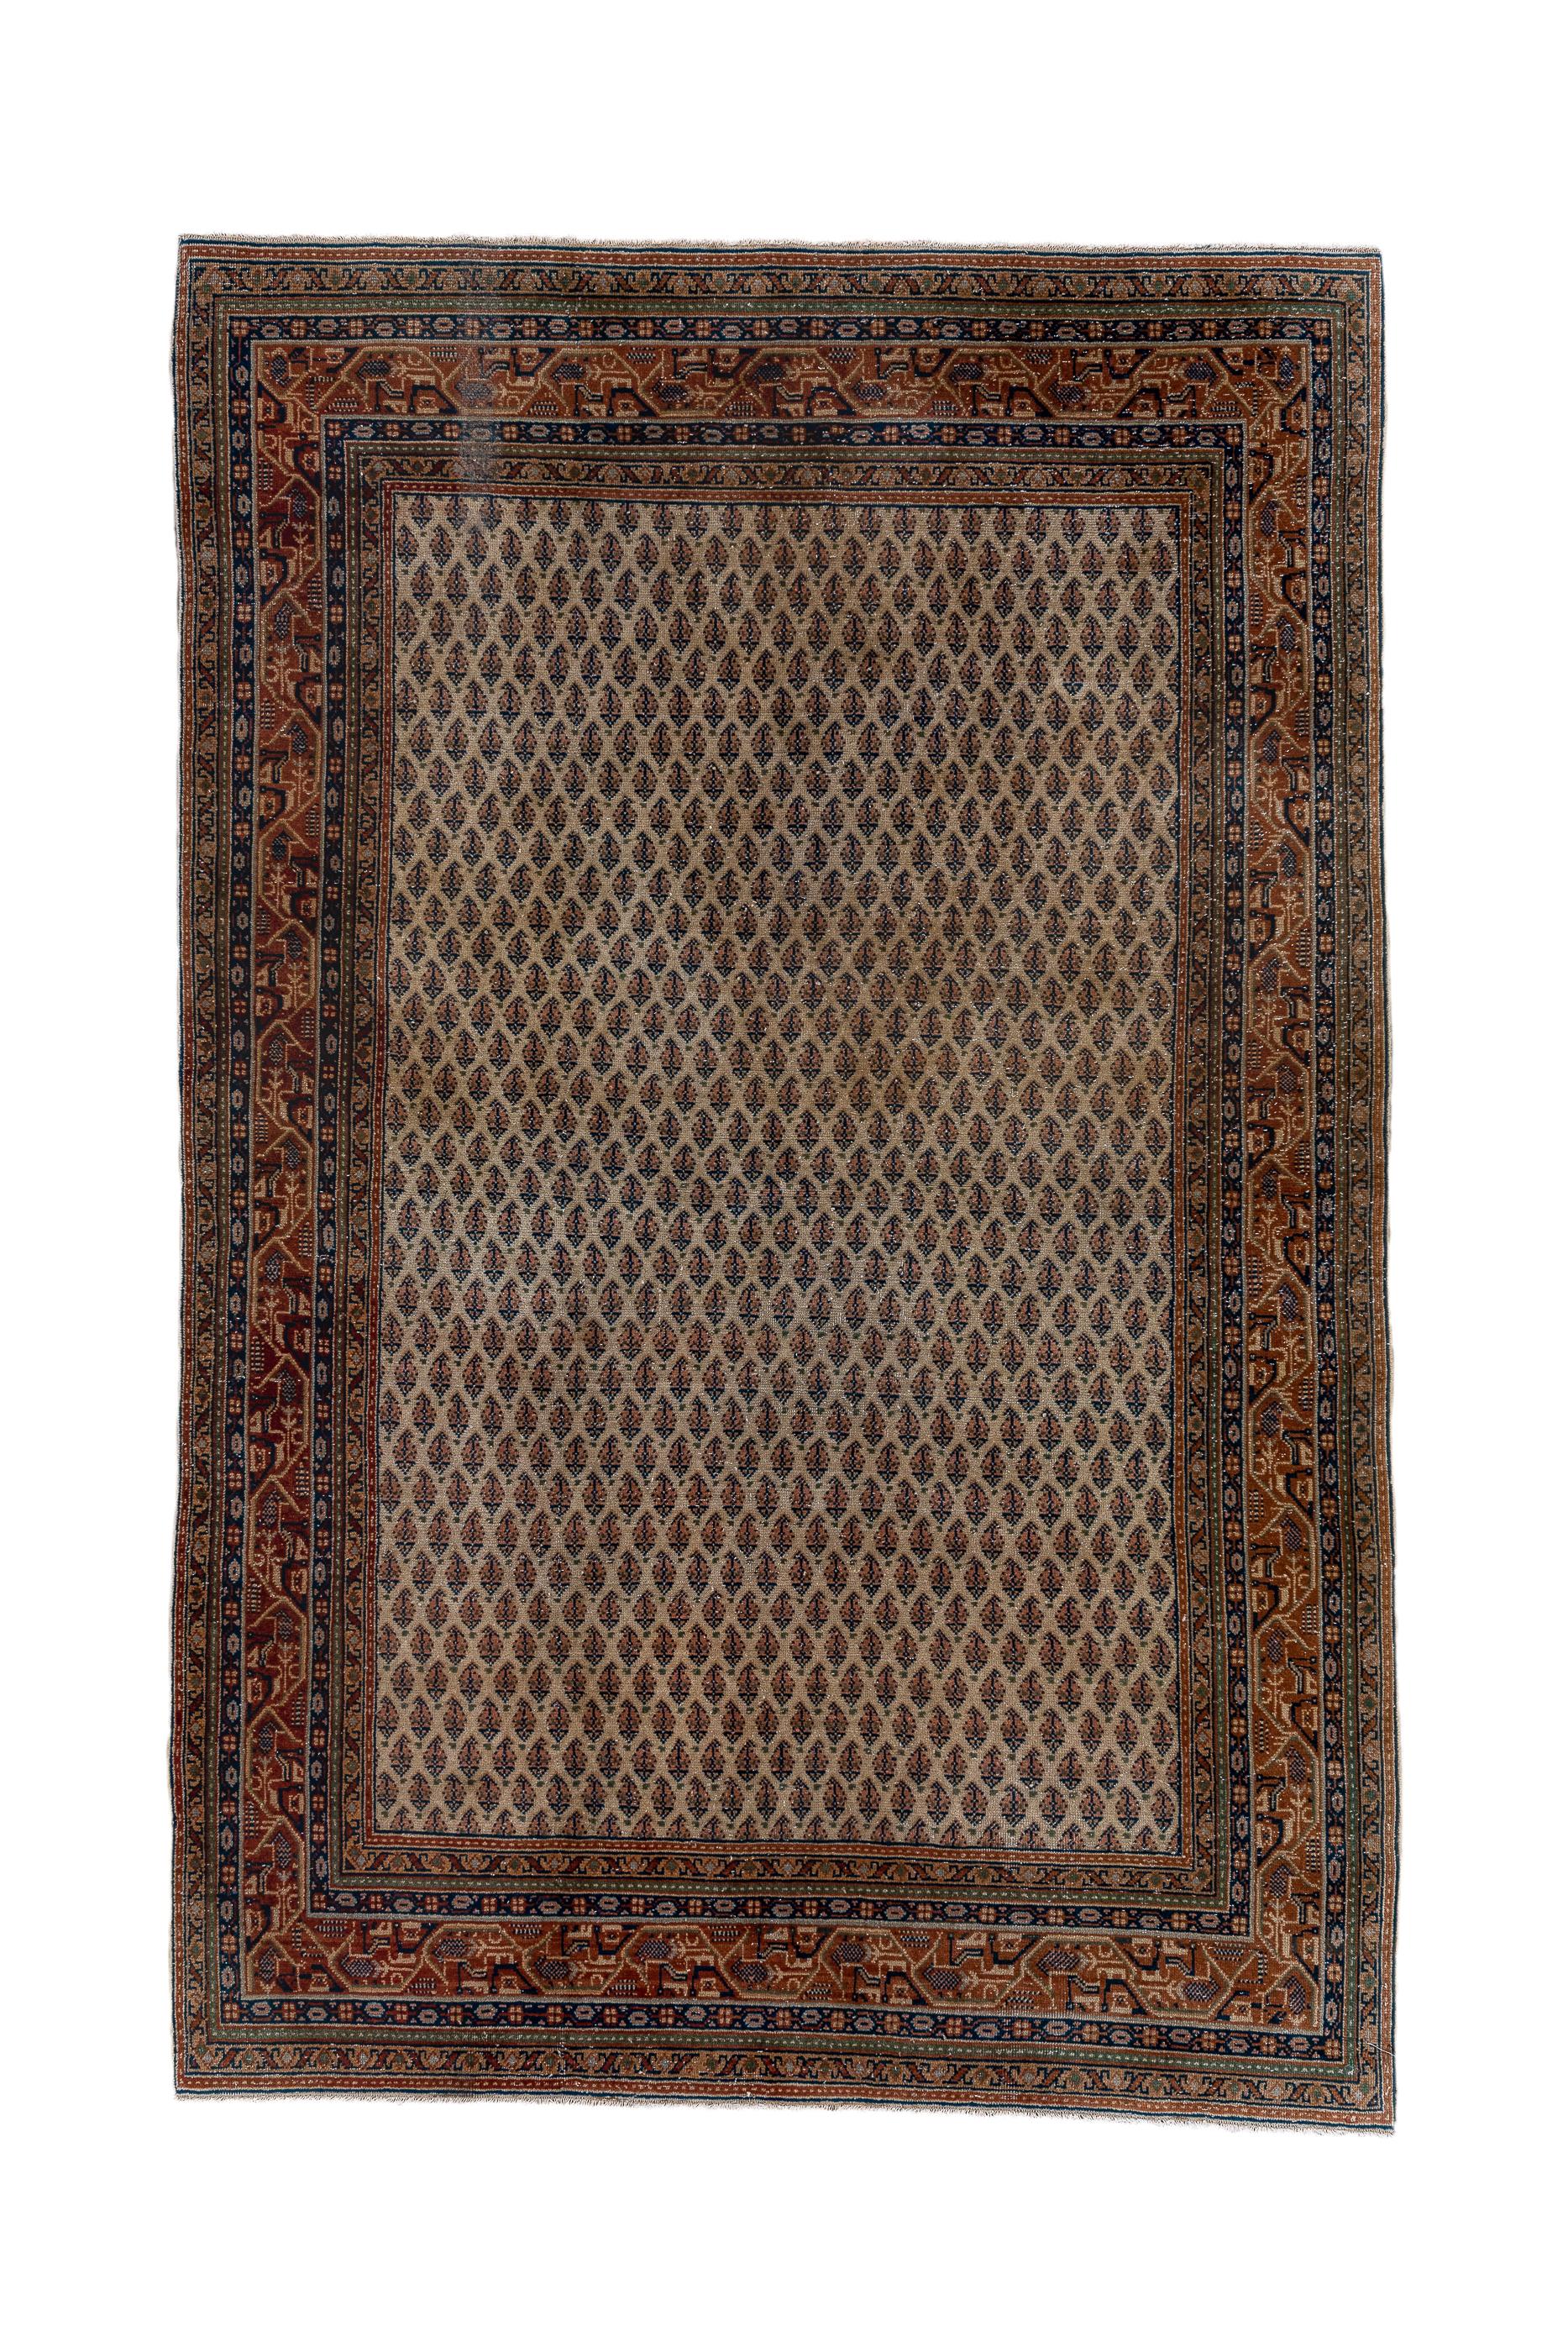 This well-woven, west Persian village scatter shows an ecru/sand field with rows and reversing rows in half-drop array, of little floriated botehs, all in the Saraband style. Straw/camel main border with abstract polychrome geometric forms. Good